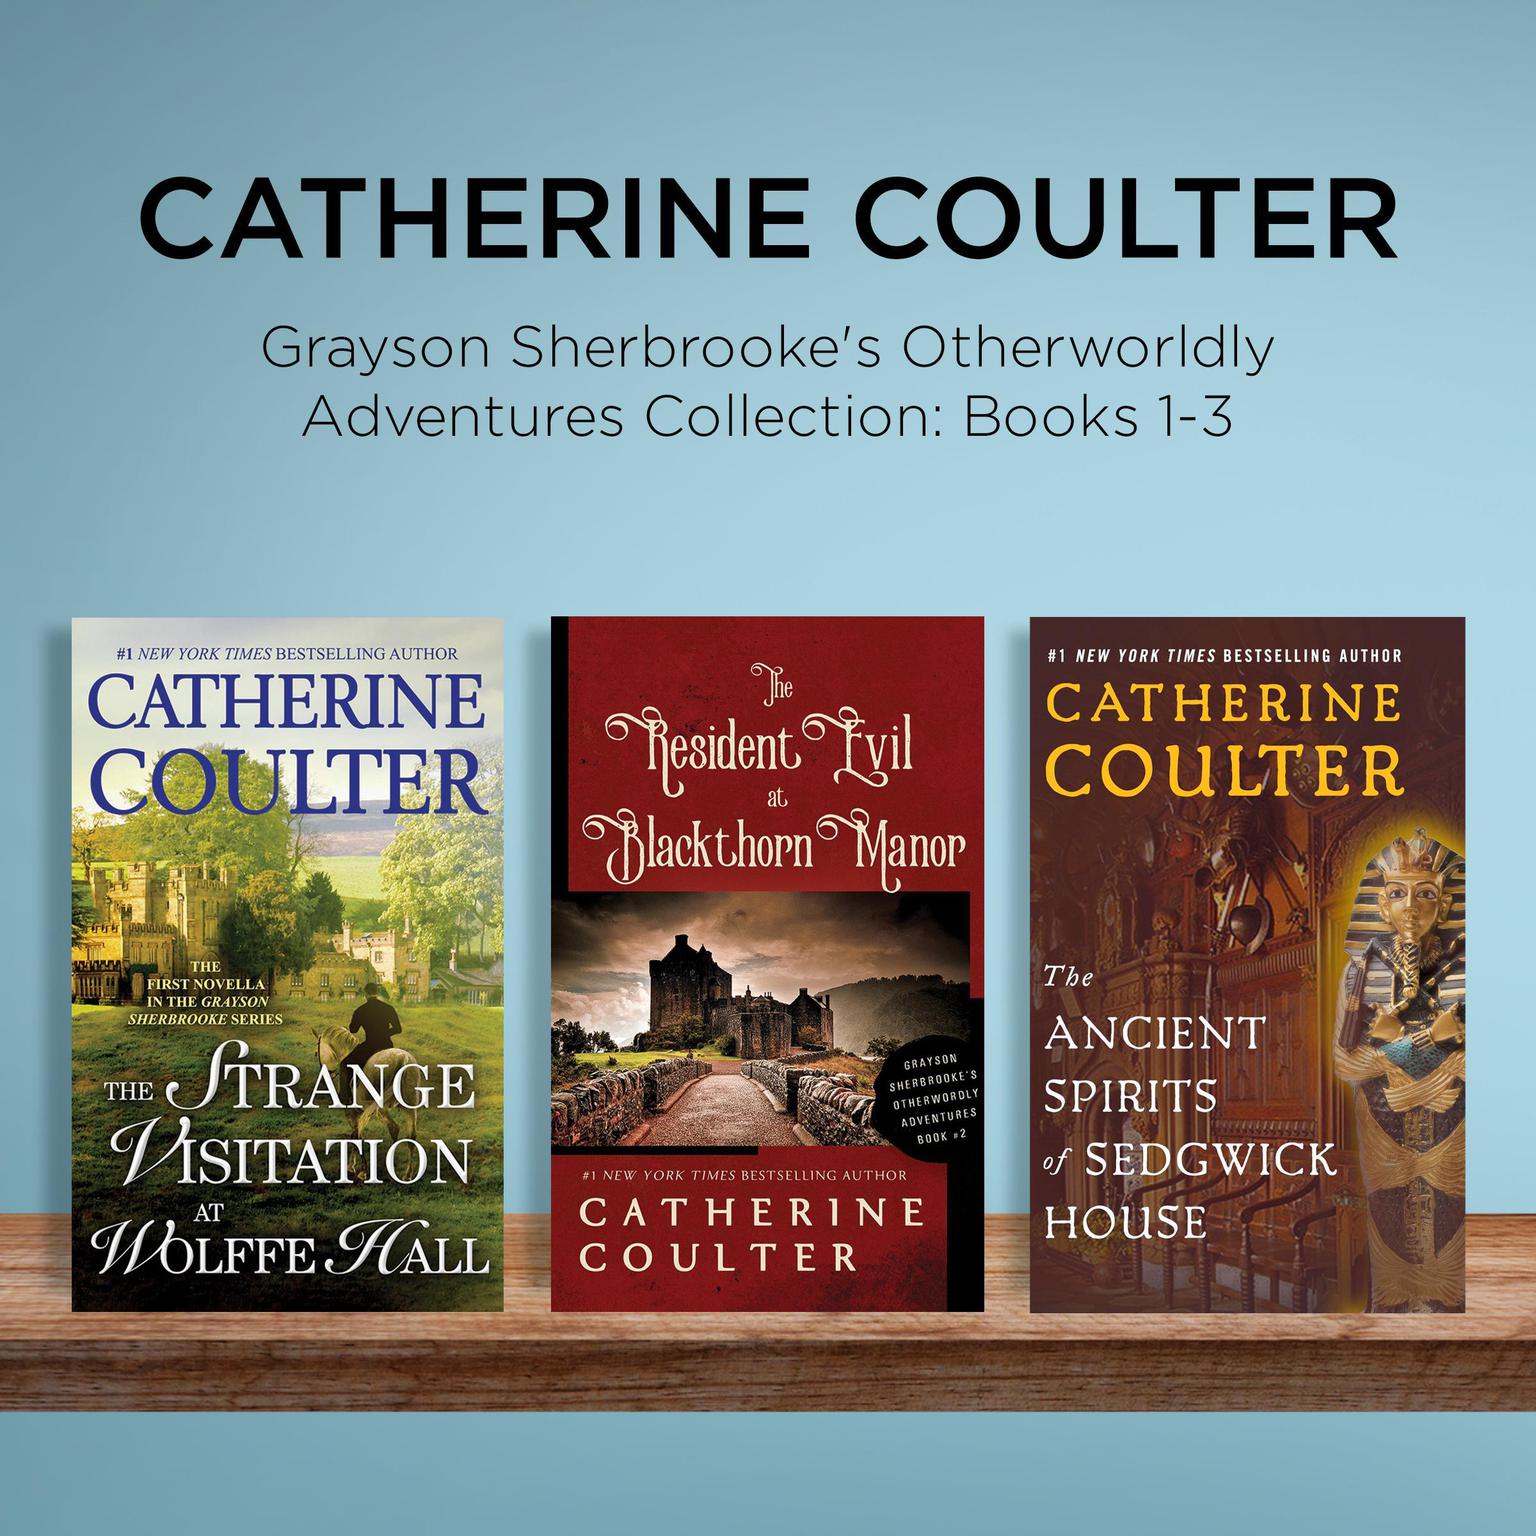 Catherine Coulter - Grayson Sherbrookes Otherworldly Adventures Collection: Books 1-3: The Strange Visitation at Wolffe Hall, The Resident Evil at Blackthorn Manor, The Ancient Spirits of Sedgwick House Audiobook, by Catherine Coulter